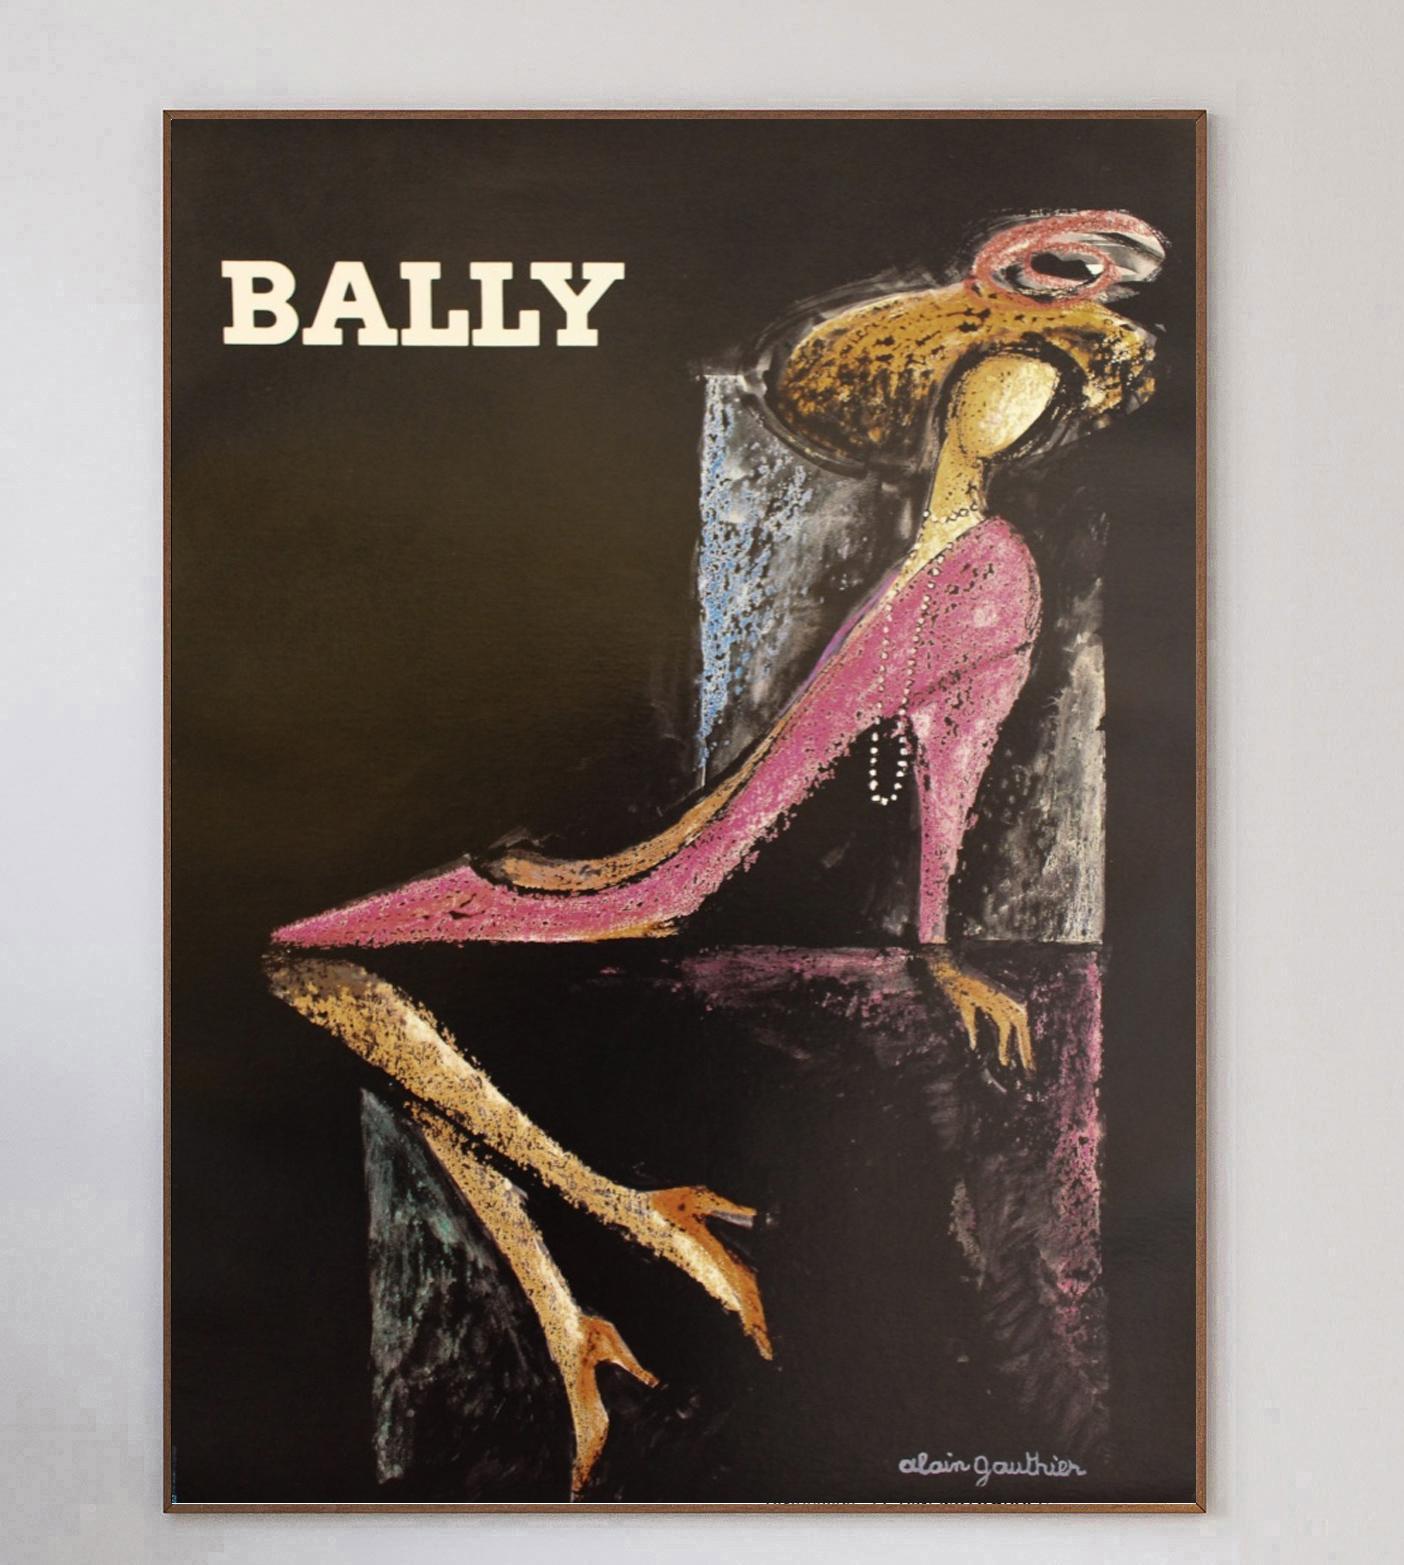 Beautifully designed poster from 1970 advertising the luxury Swiss shoe brand Bally. With artwork from French graphic designer and poster artist Alain Gauthier, this dark and luxurious piece oozes class, especially in its extra-large size.

This